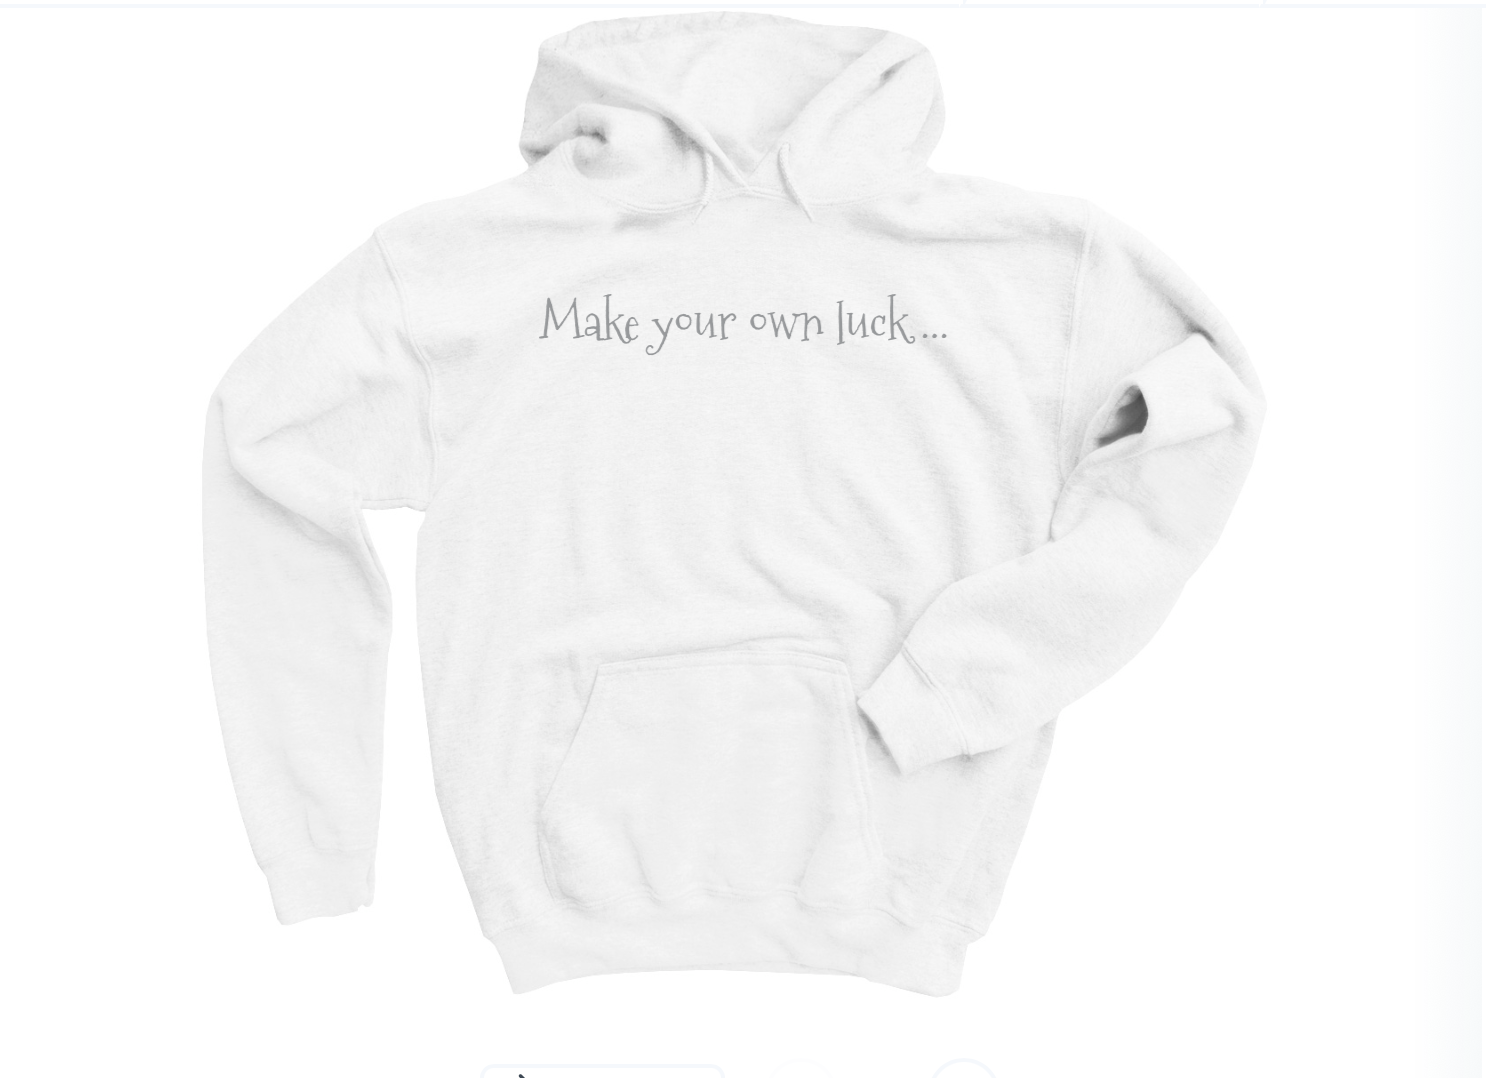 MAKE YOUR OWN LUCK ... lucky plush hoody!